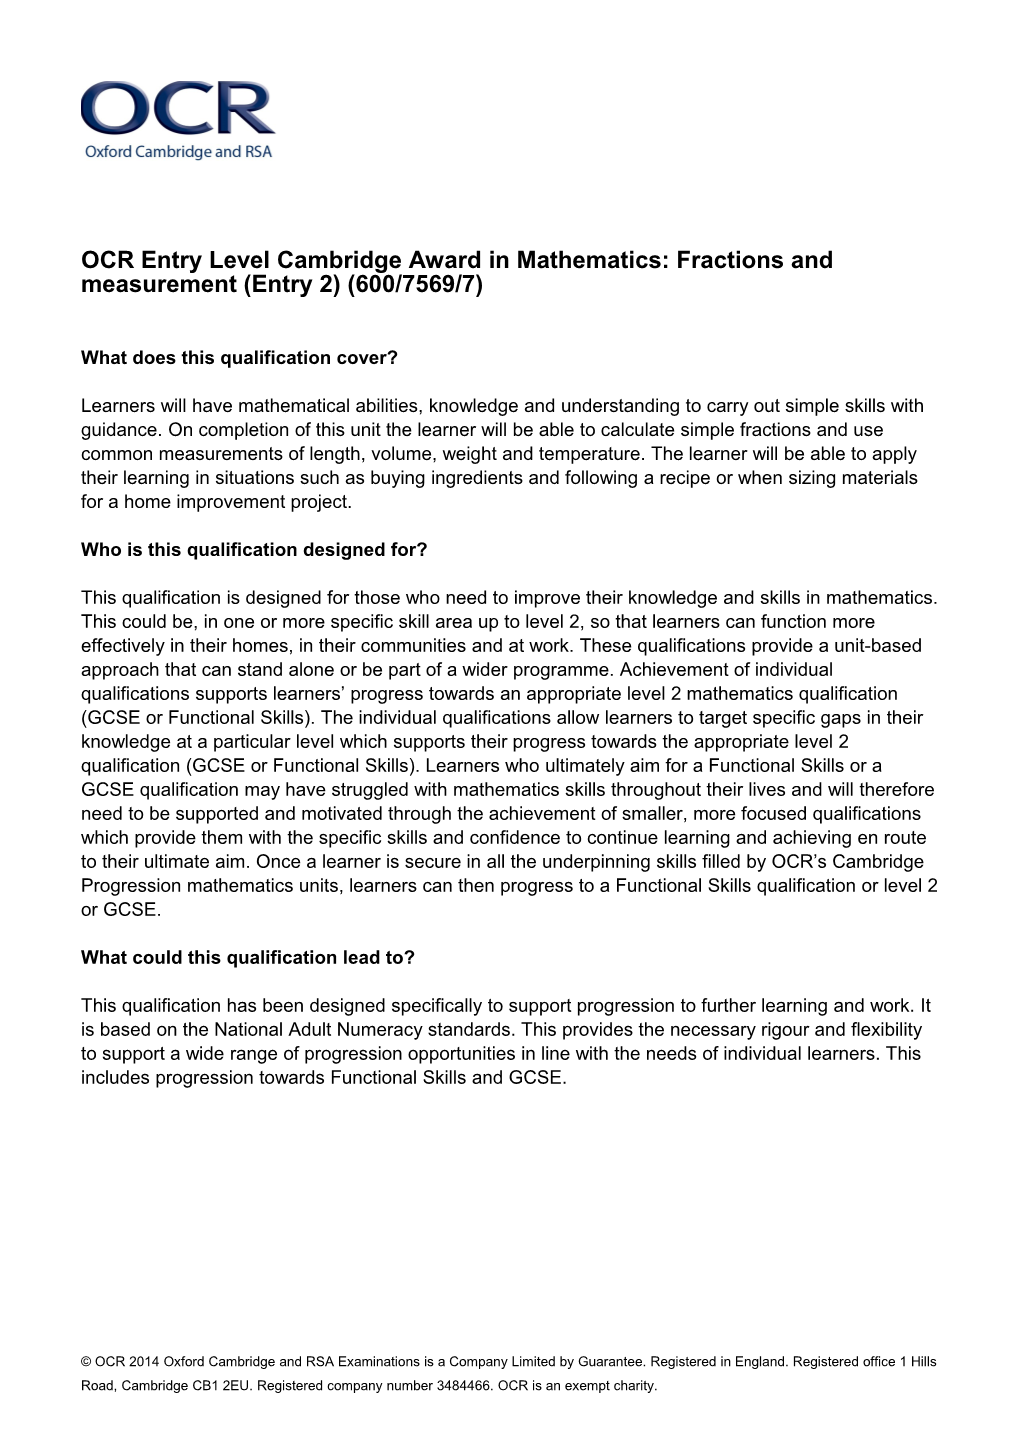 OCR Entry Level Cambridge Award in Mathematics: Fractions and Measurement (Entry 2) (600/7569/7)